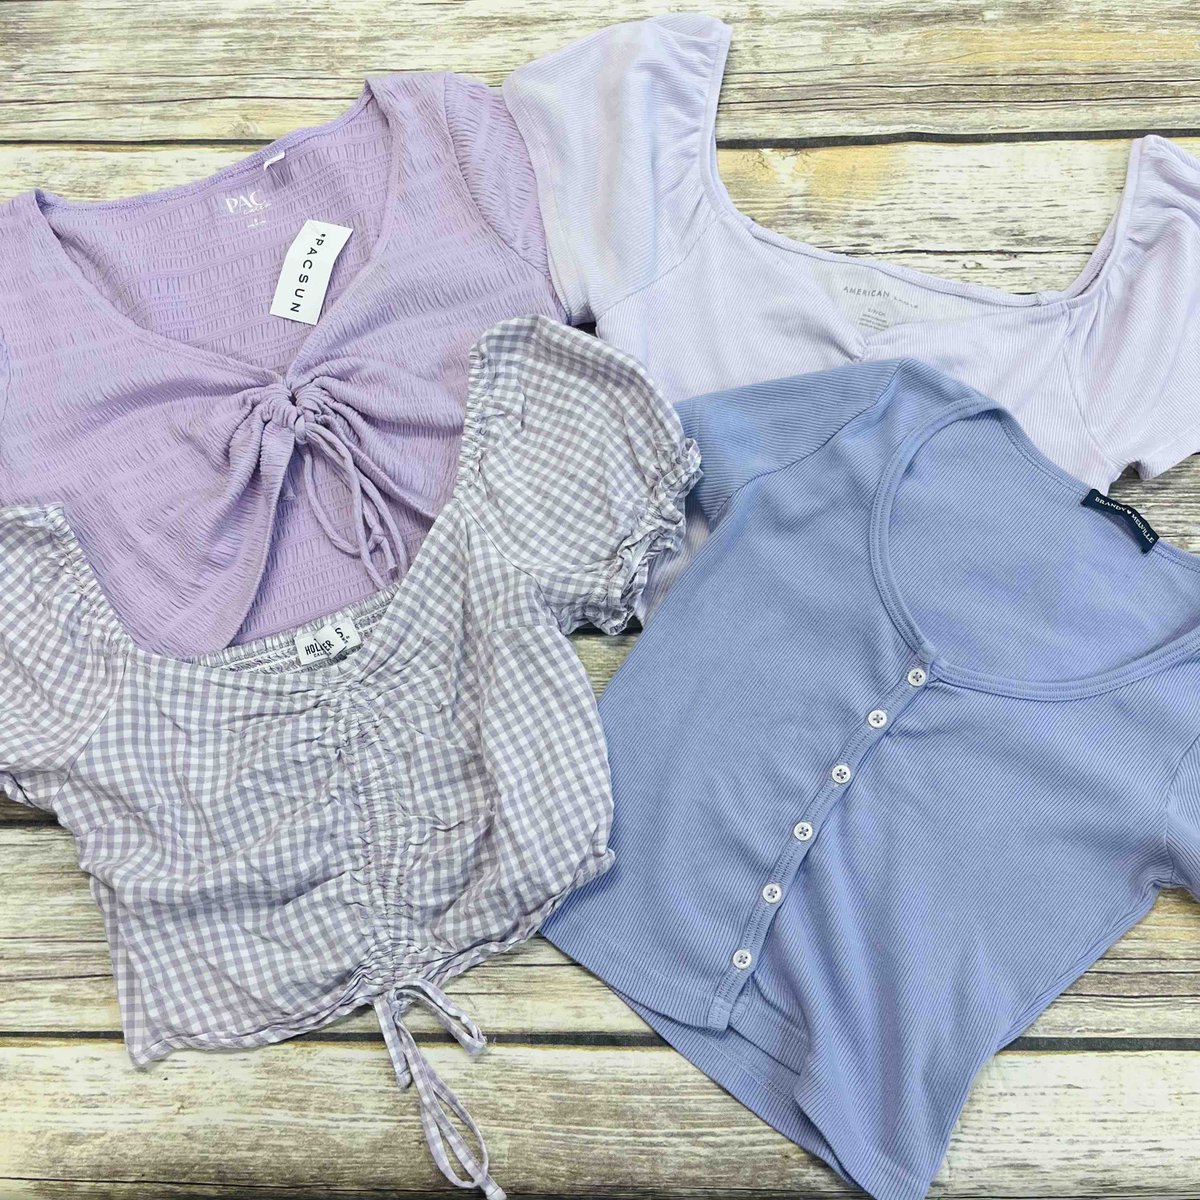 Matching colors have never been easier to find than they are at Plato’s 🤩 if you’re looking for a specific piece to match, you’re in the right place 💜
———
#gentlyused #platoscloset #thriftedootd #thriftedstyle #brandsforless #brandname